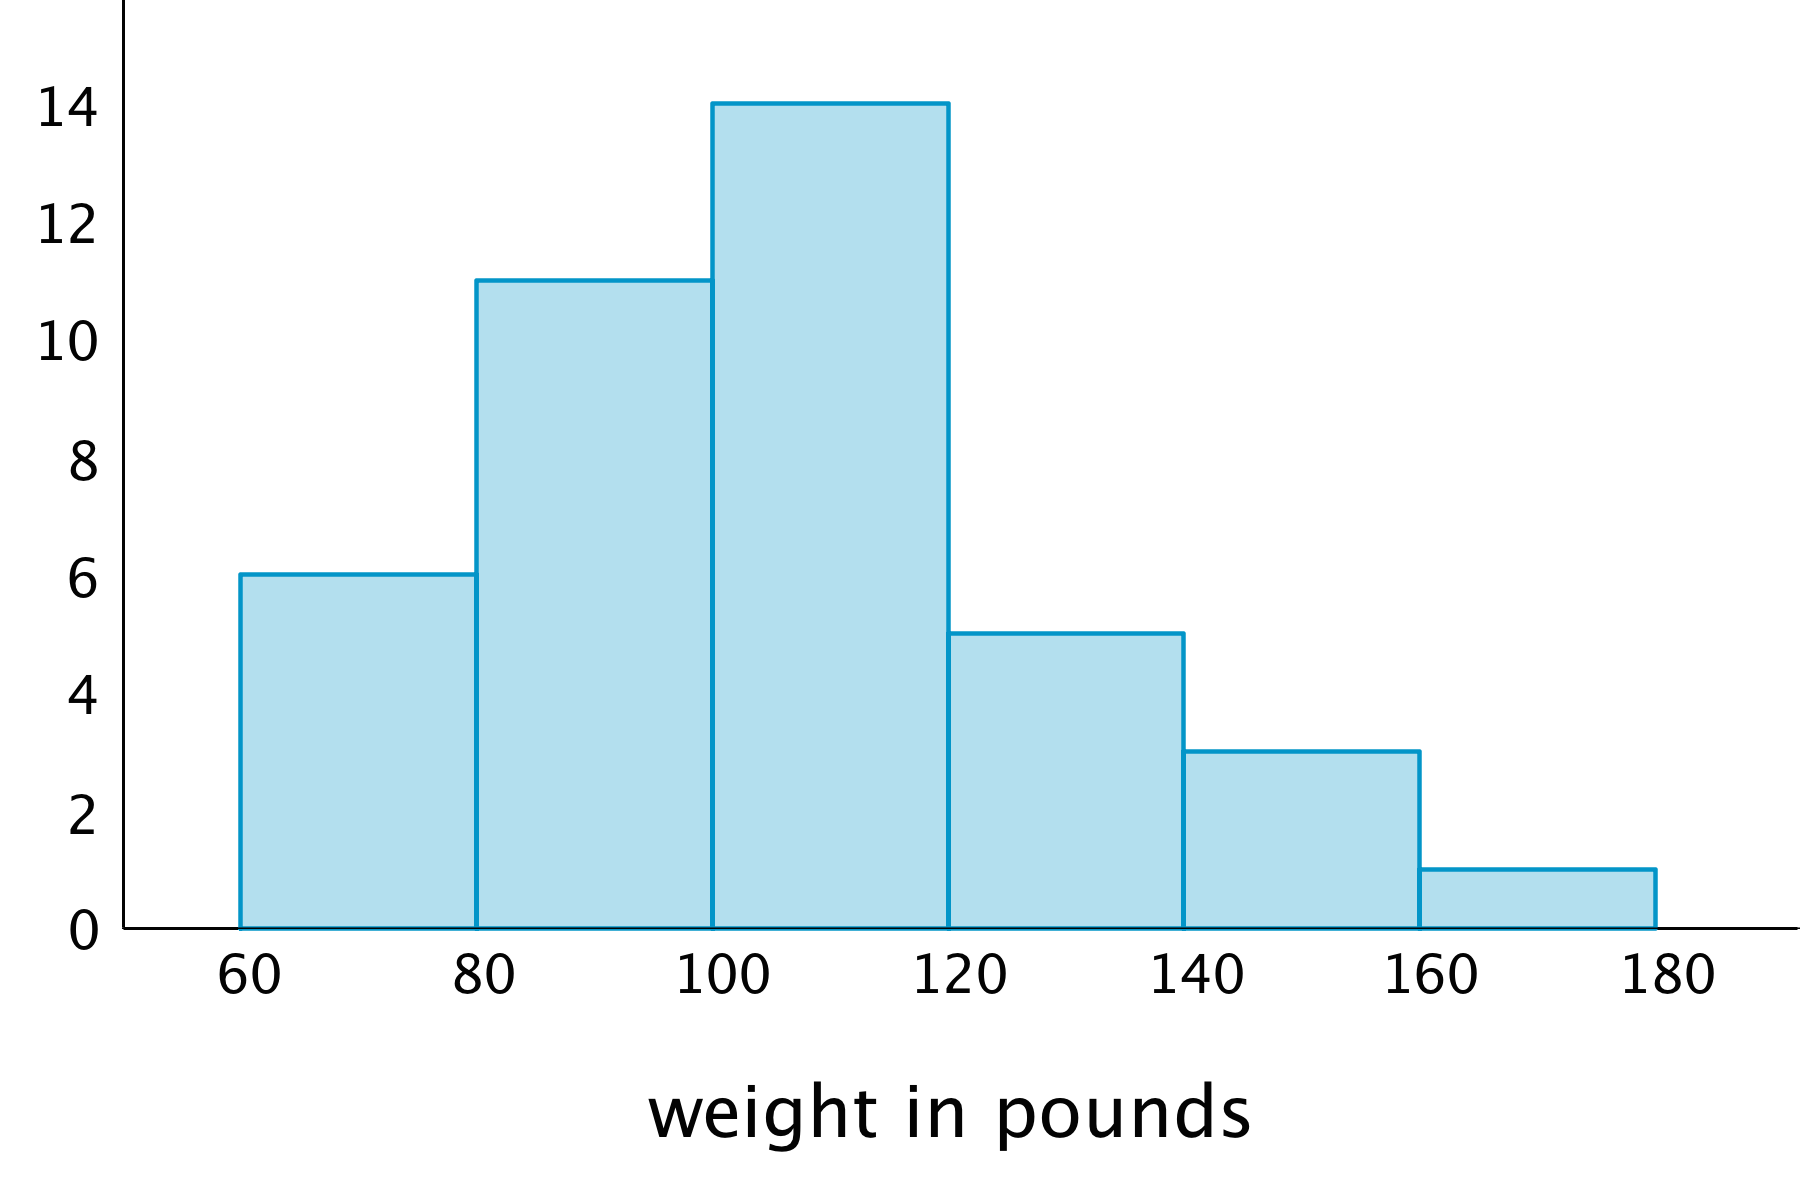 A histogram: The horizontal axis is labeled "weight in pounds" and the numbers 60 through 180, in increments of 20, are indicated. On the vertical axis the numbers 0 through 14, in increments of 2, are indicated. The data represented by the bars are as follows: Weight from 60 up to 80, 6. Weight from 80 up to 100, 11. Weight from 100 up to 120 , 14. Weight from 120 up to 140, 5. Weight from 140 up to 160, 3. Weight from 160 up to 180, 1.